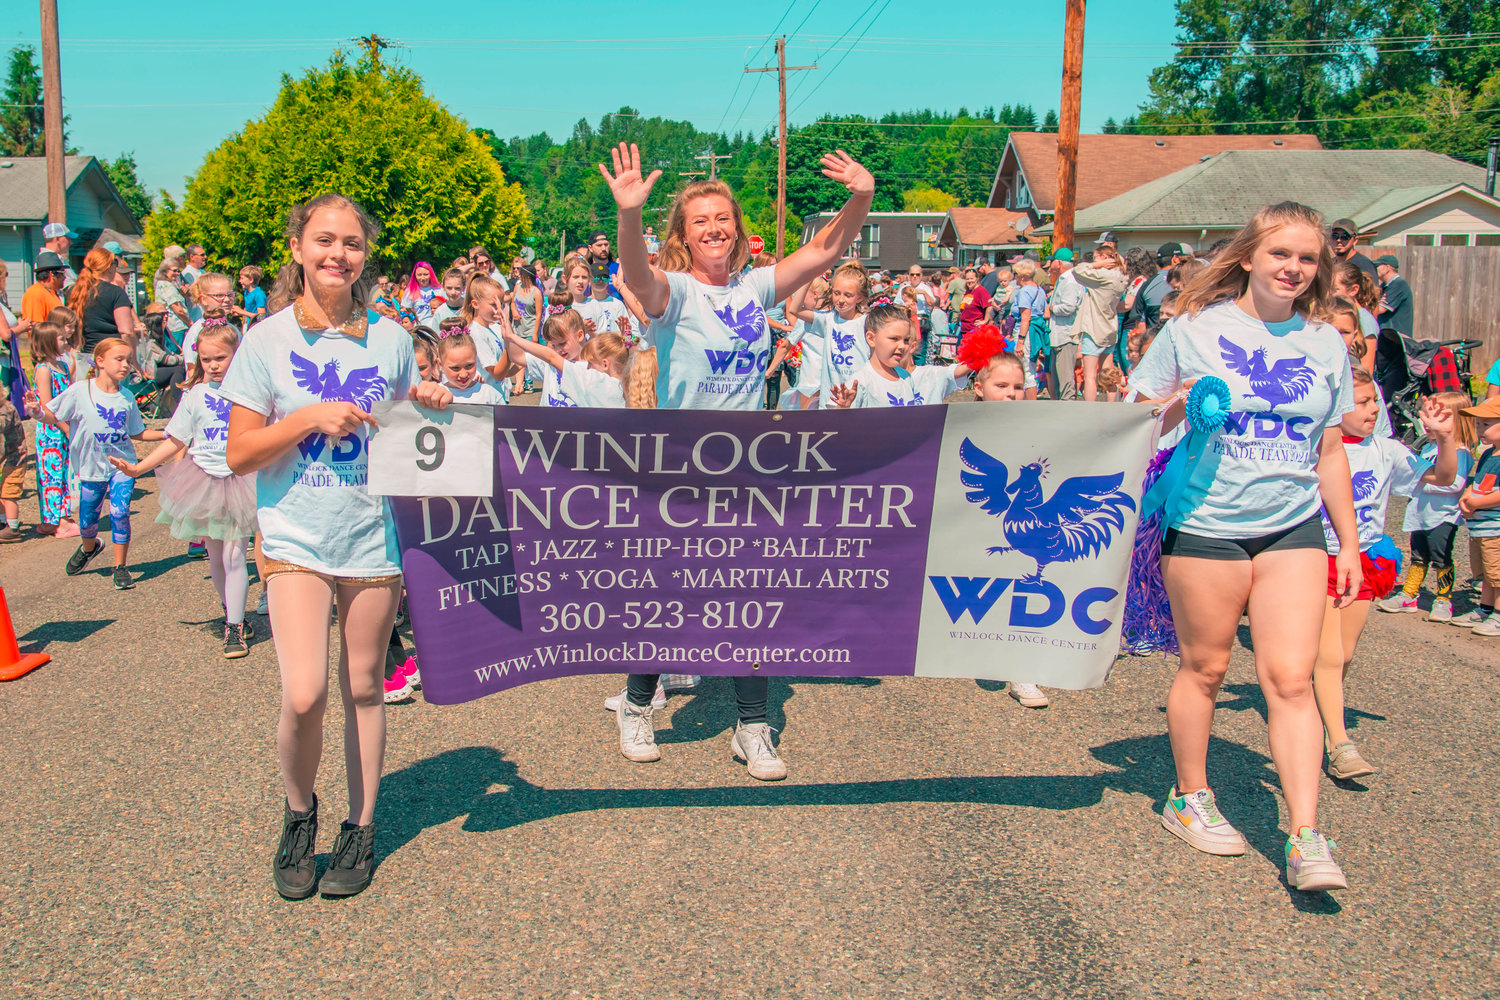 The Winlock Dance Center made an appearance in Toledo during the Cheese Days parade Saturday.